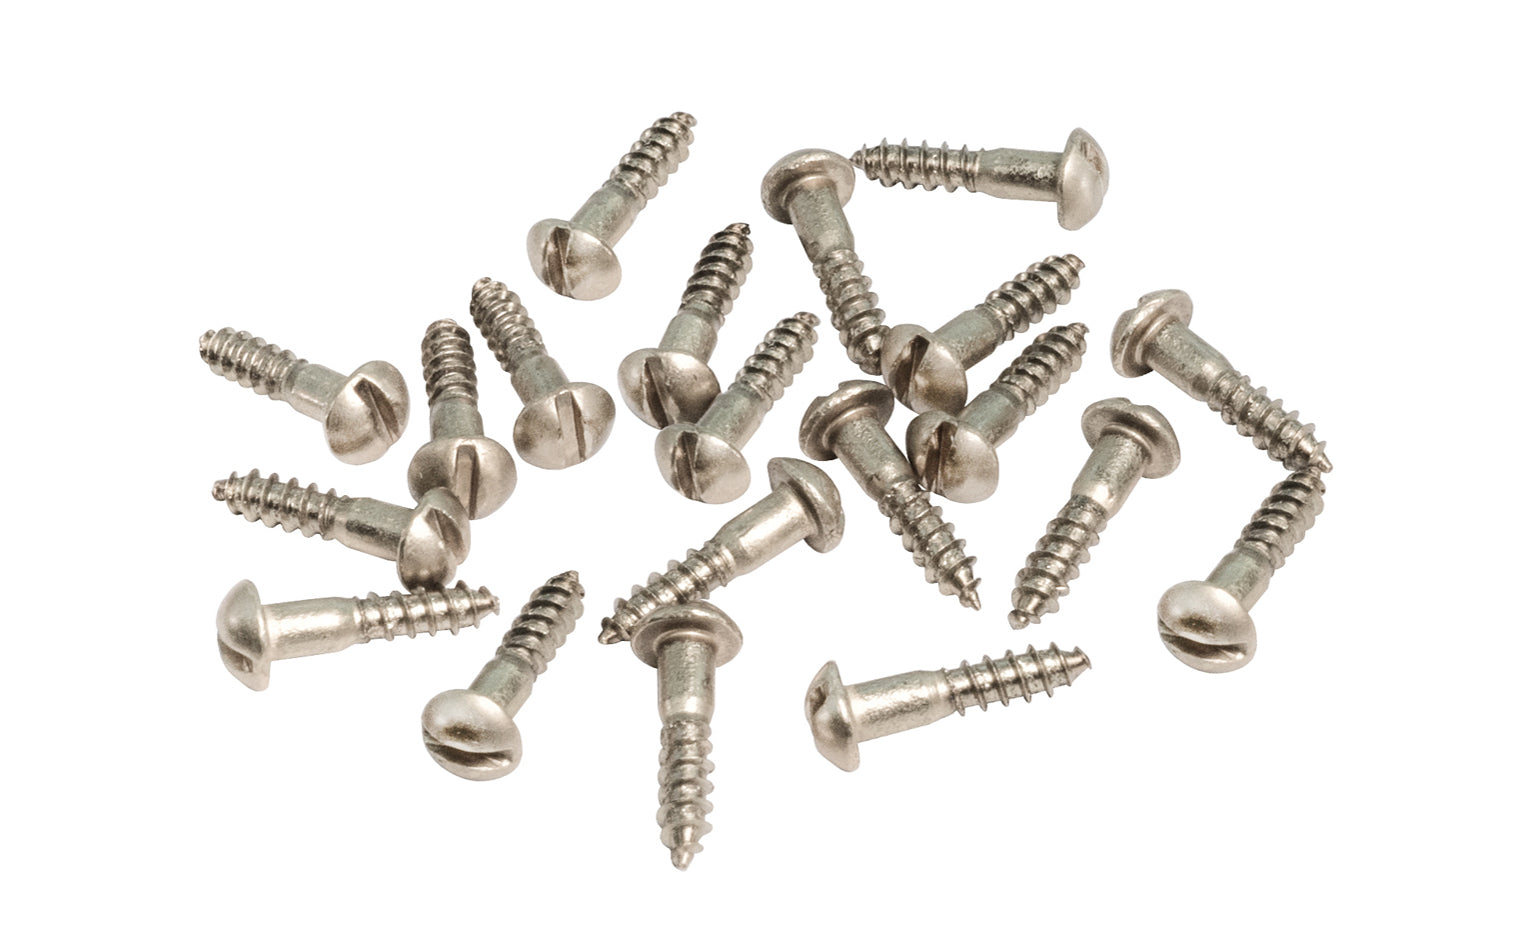 Solid Brass #5 x 5/8" Round Head Slotted Wood Screws. Traditional & classic vintage-style wood screws. Sold as 20 pieces in a bag. Polished nickel finish. Slotted Head